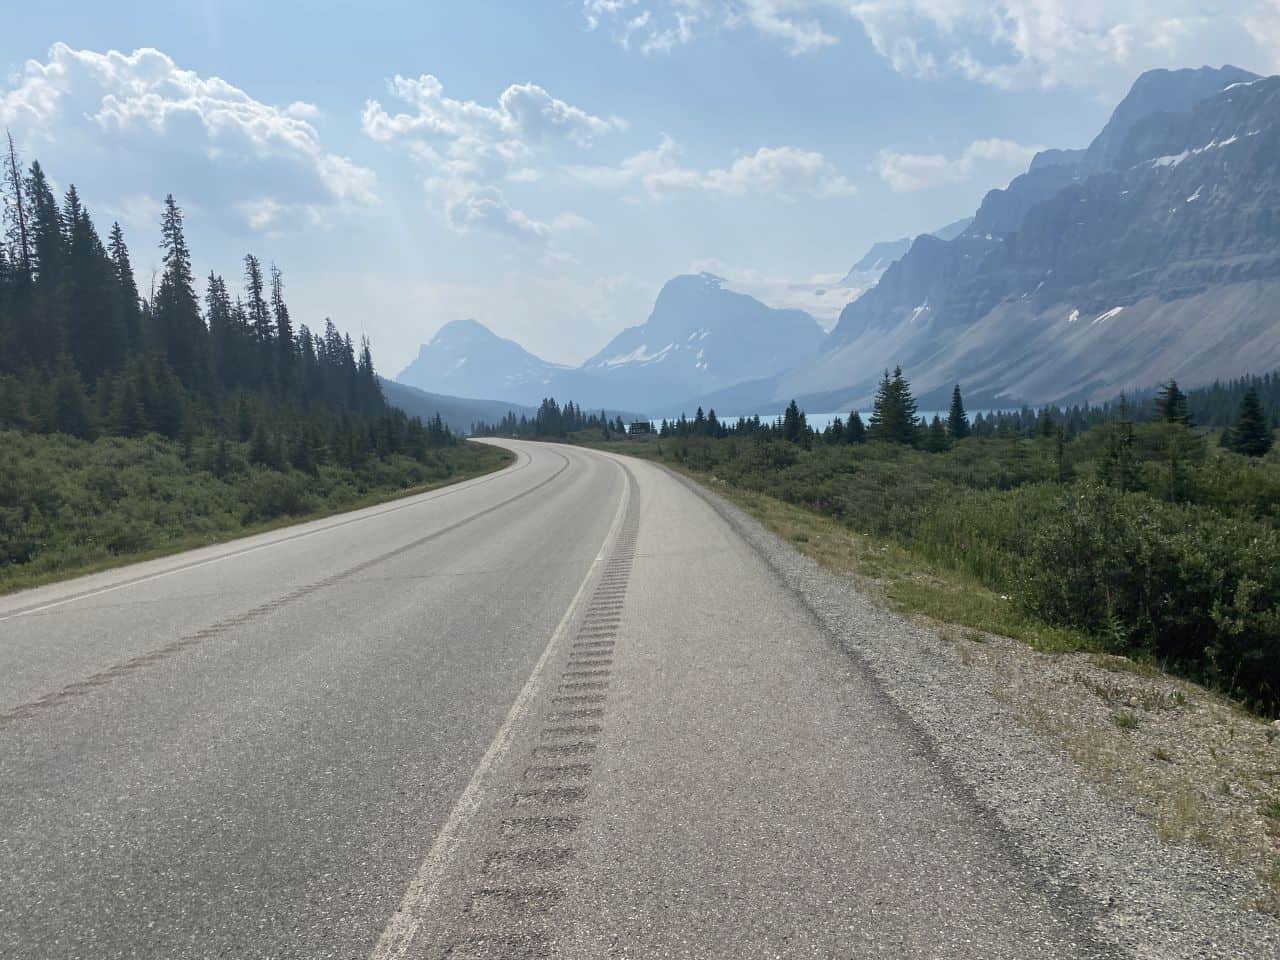 Not a soul on the road as we ride our bikes  along the Icefields Parkway towards Bow Lake in Banff National Park, Alberta, Canada.